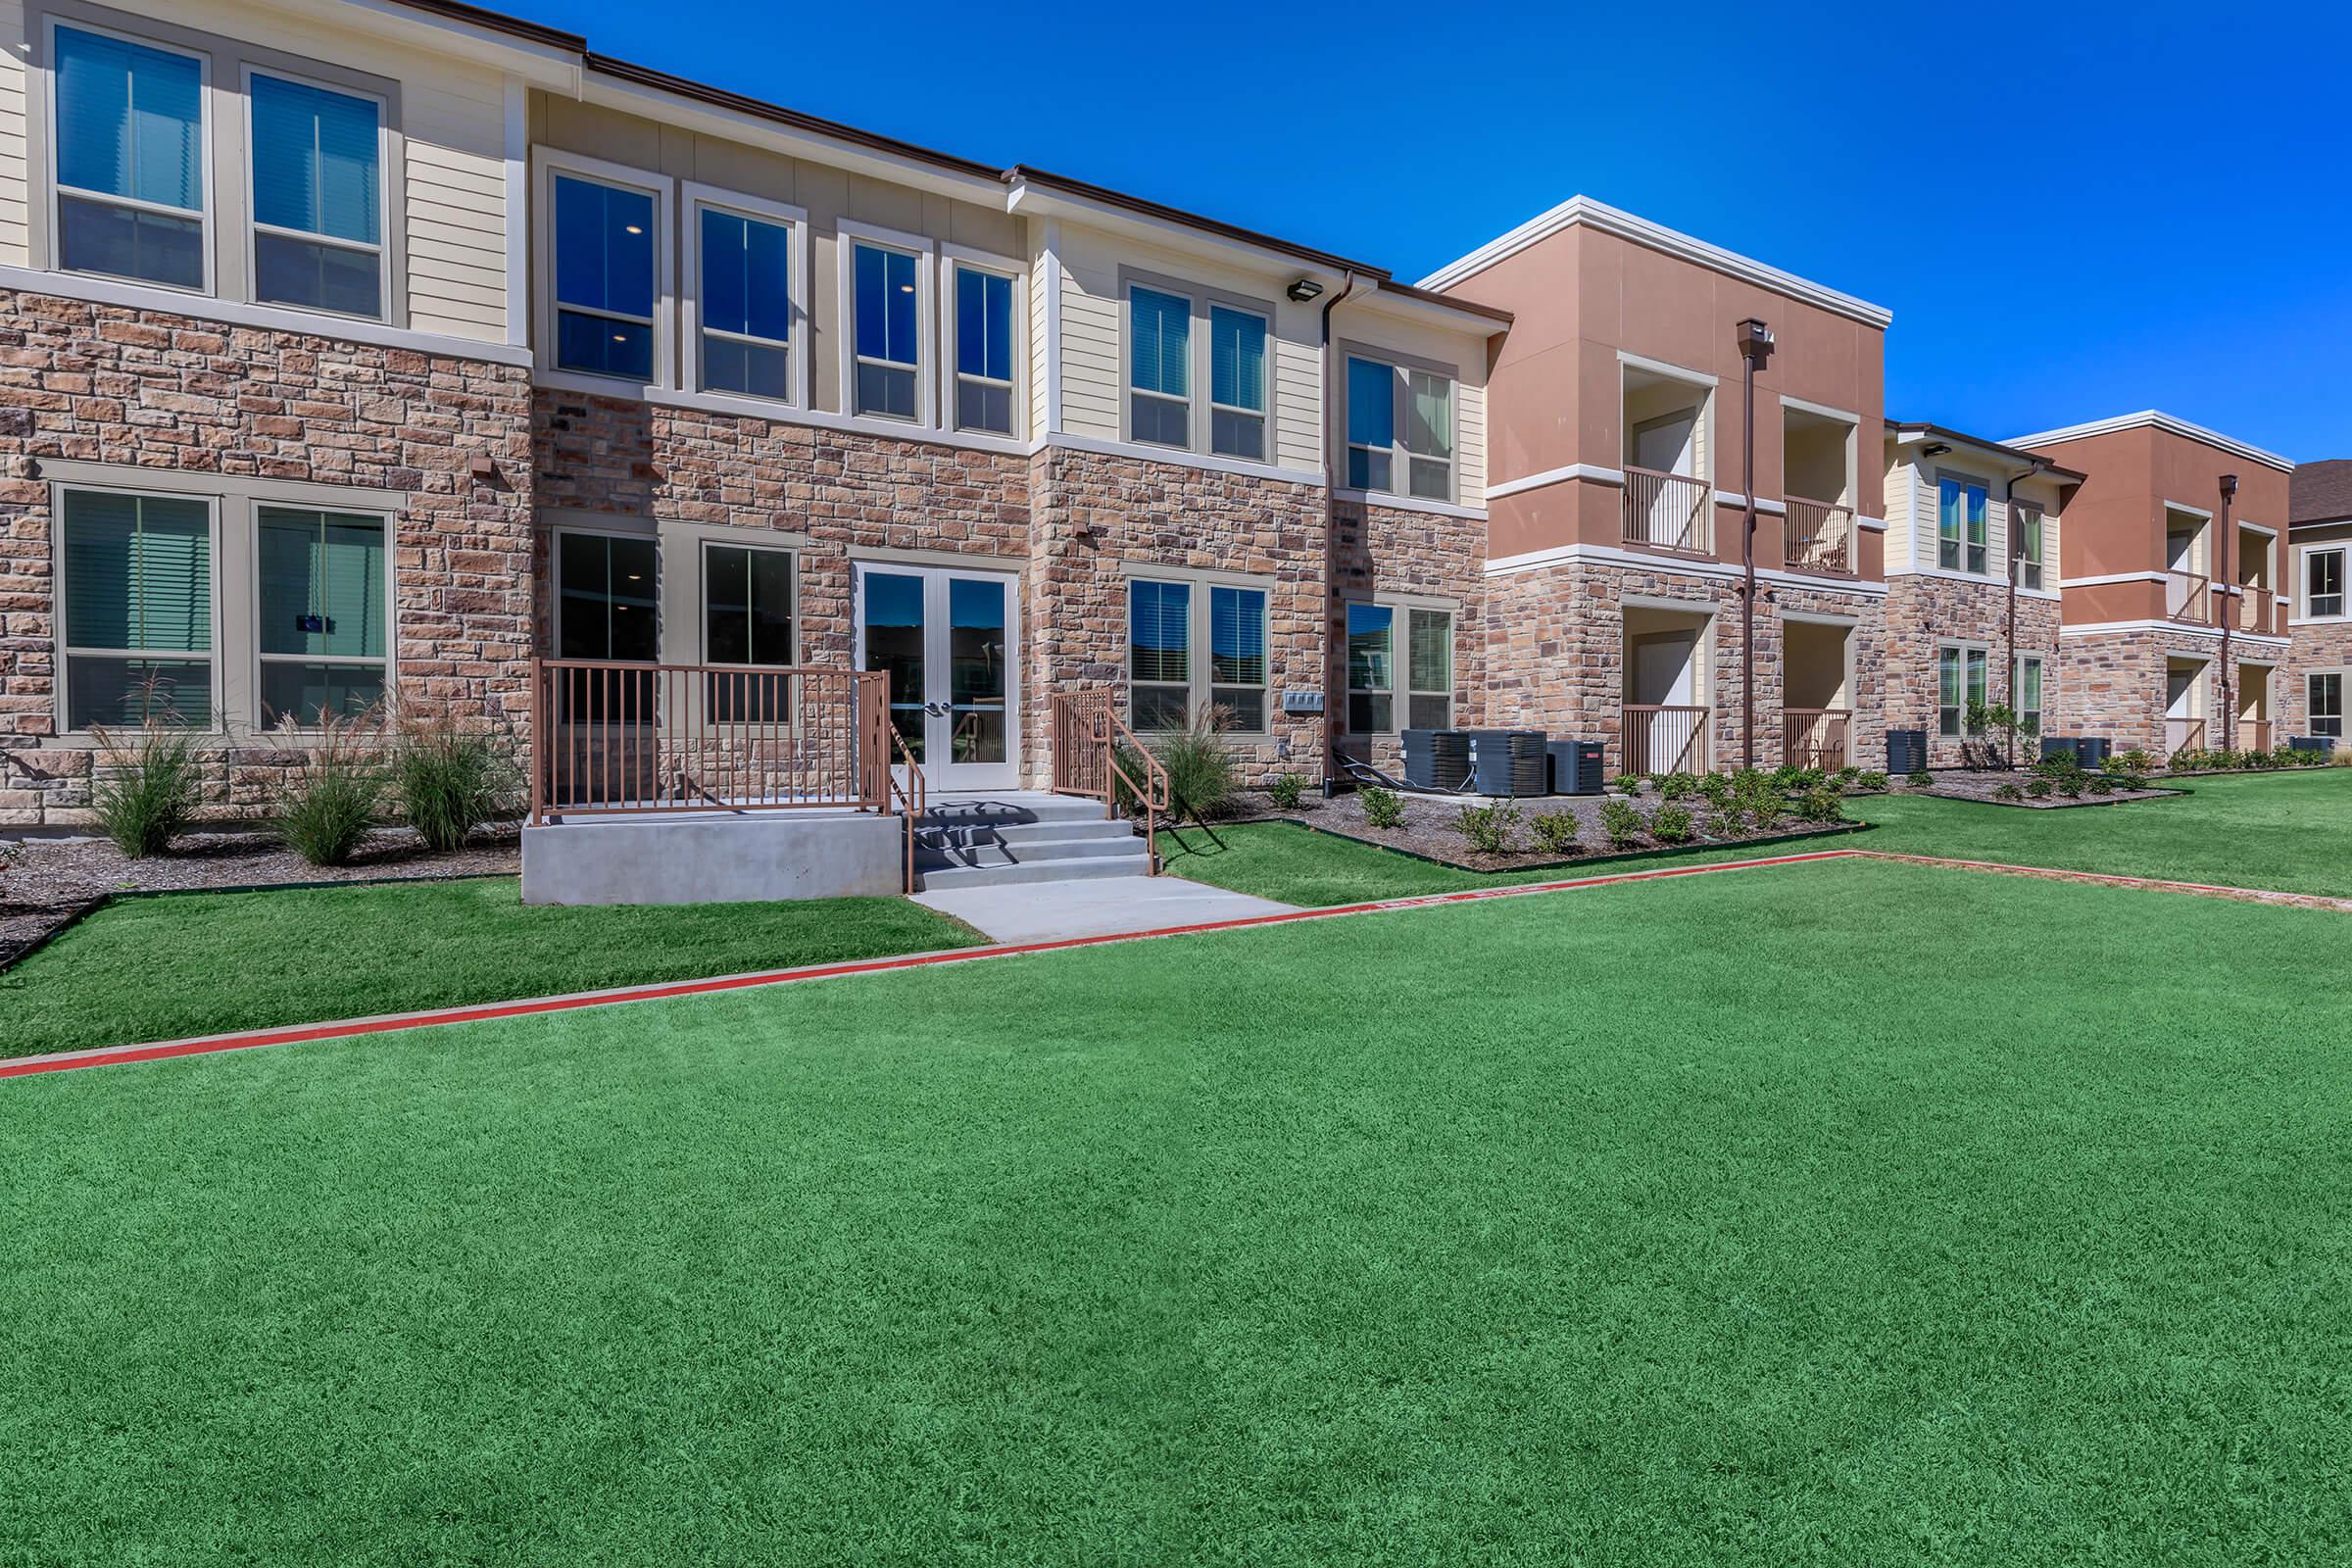 ONE AND TWO BEDROOM APARTMENTS FOR RENT IN GARLAND, TX